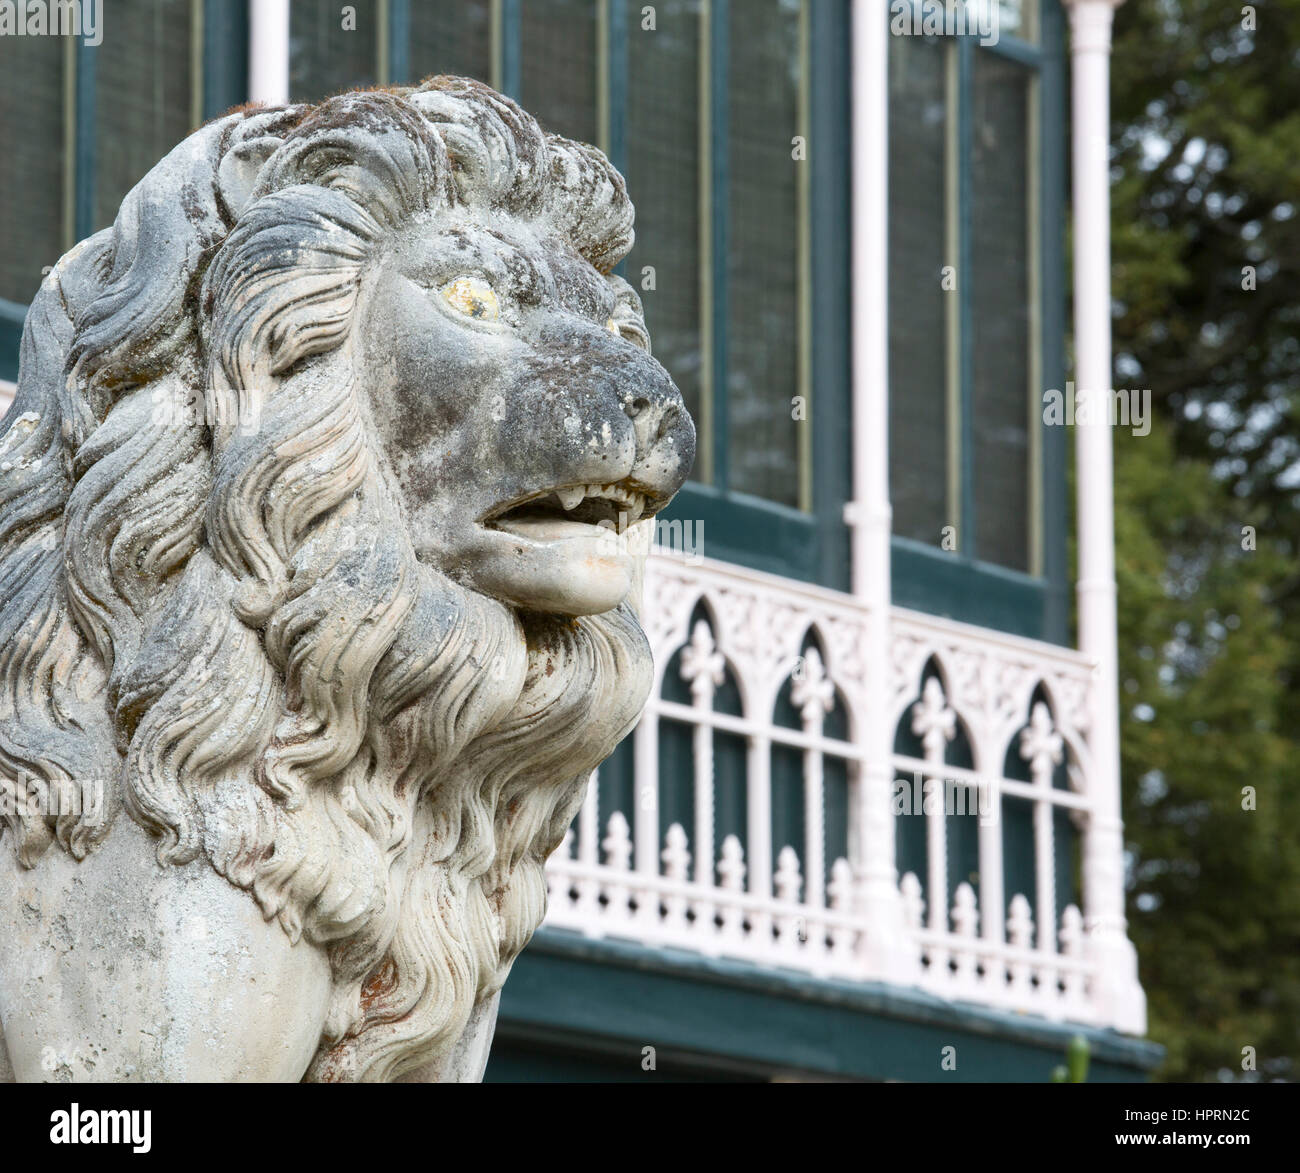 Dunedin, Otago, New Zealand. One of a pair of stone lions standing guard over the main entrance to Larnach Castle, Otago Peninsula. Stock Photo